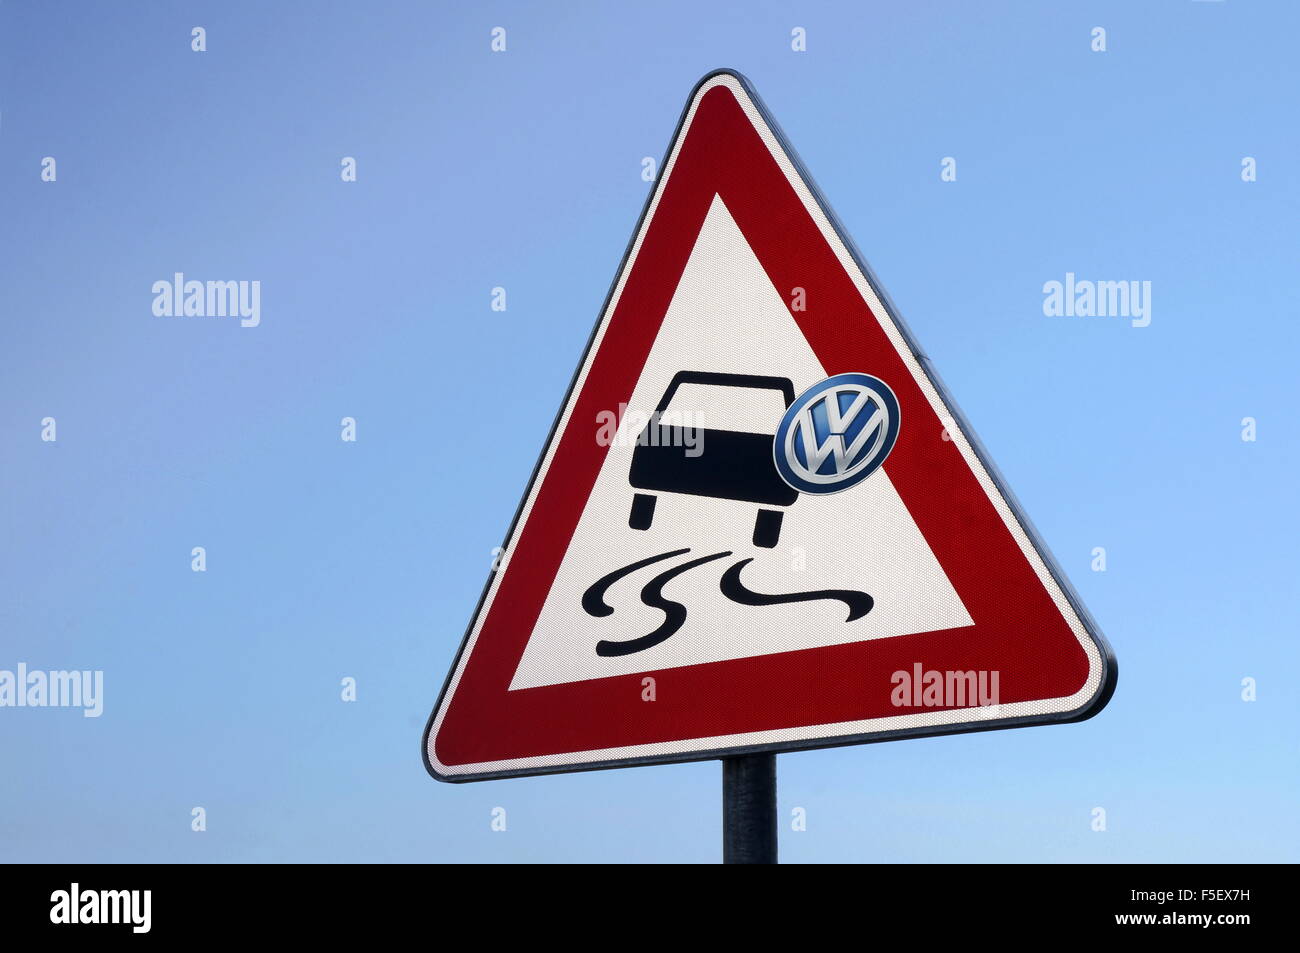 ILLUSTRATION - A sticker with the Volkswagen logo on the traffic risk sign that warns against the risk of skidding and slipping. The photo was taken on 30 August 2015. Photo: S. Steinach - NO WIRE SERVICE - Stock Photo